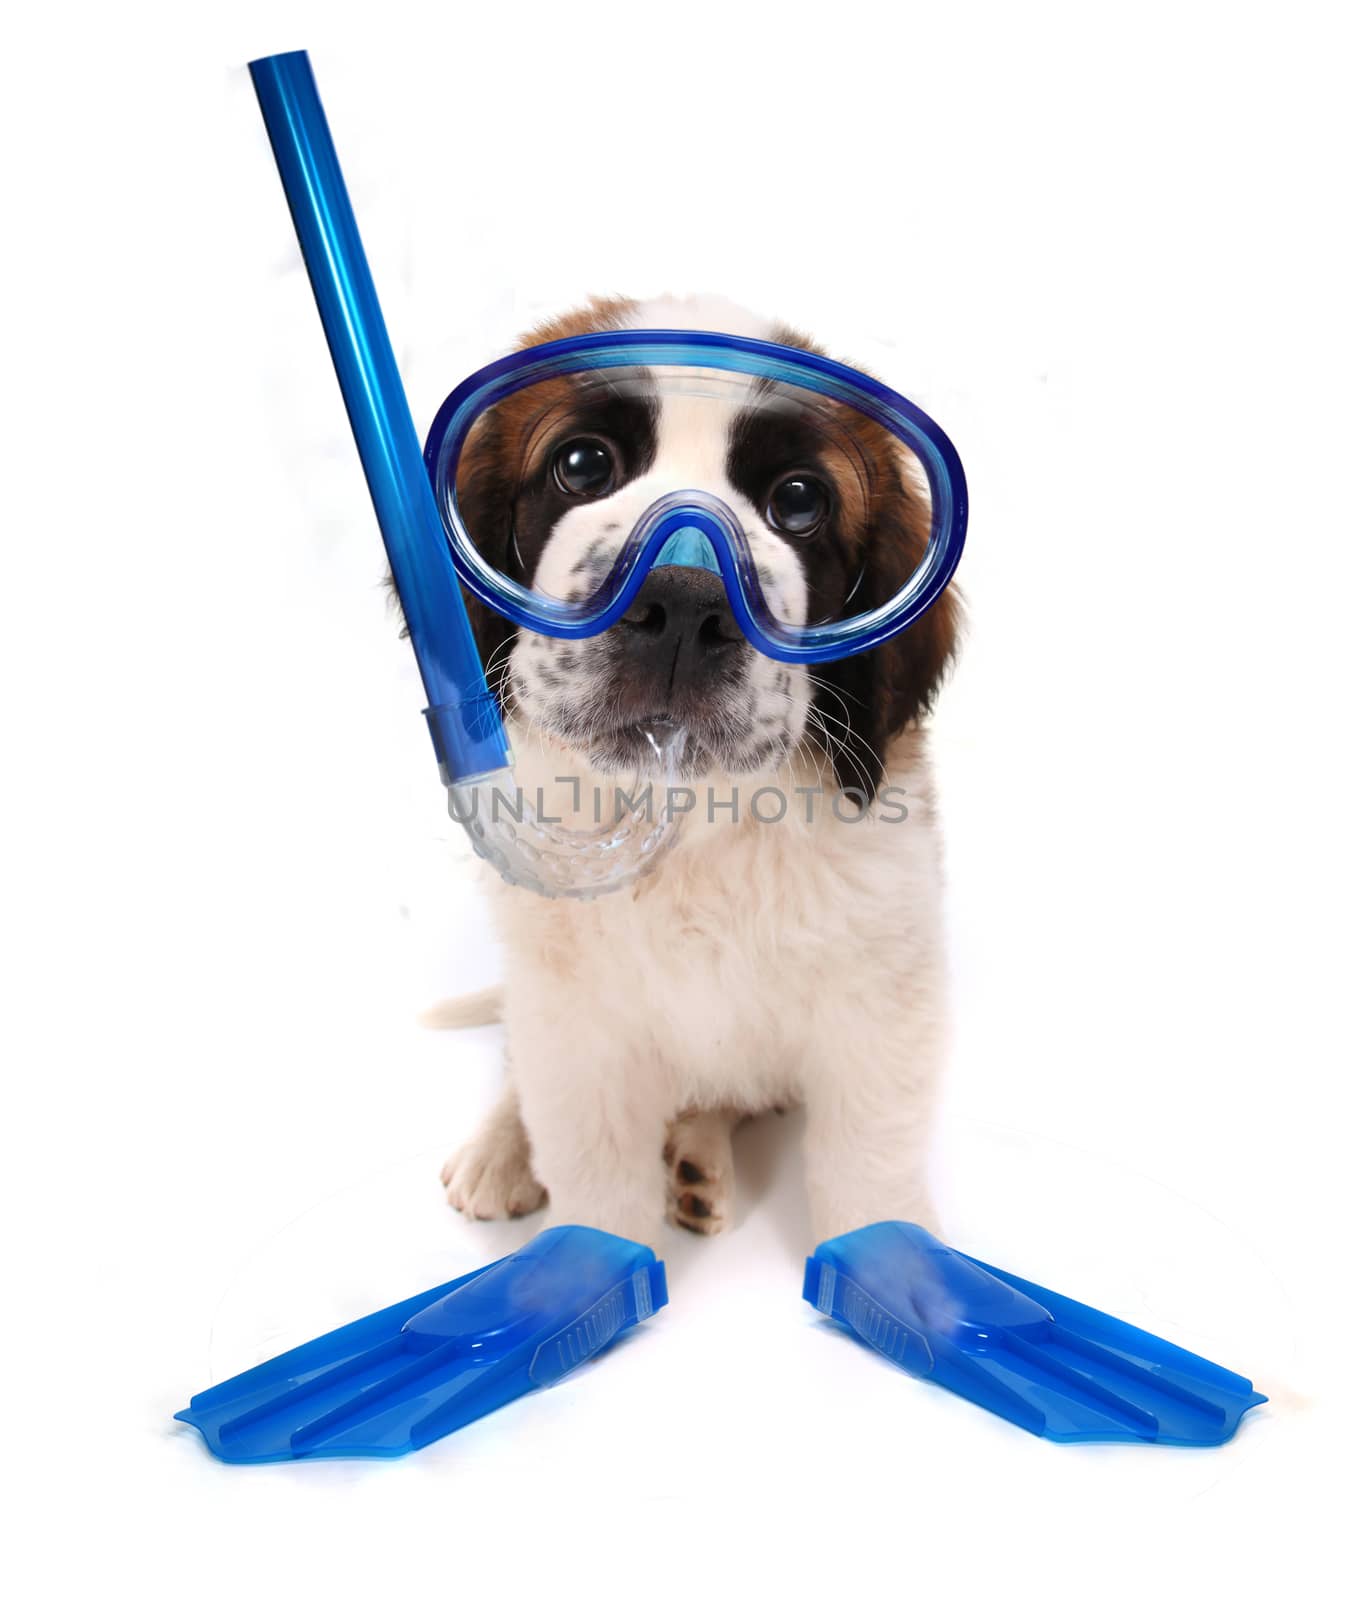 Puppy Wearing Snorkeling Gear on White Background by tobkatrina